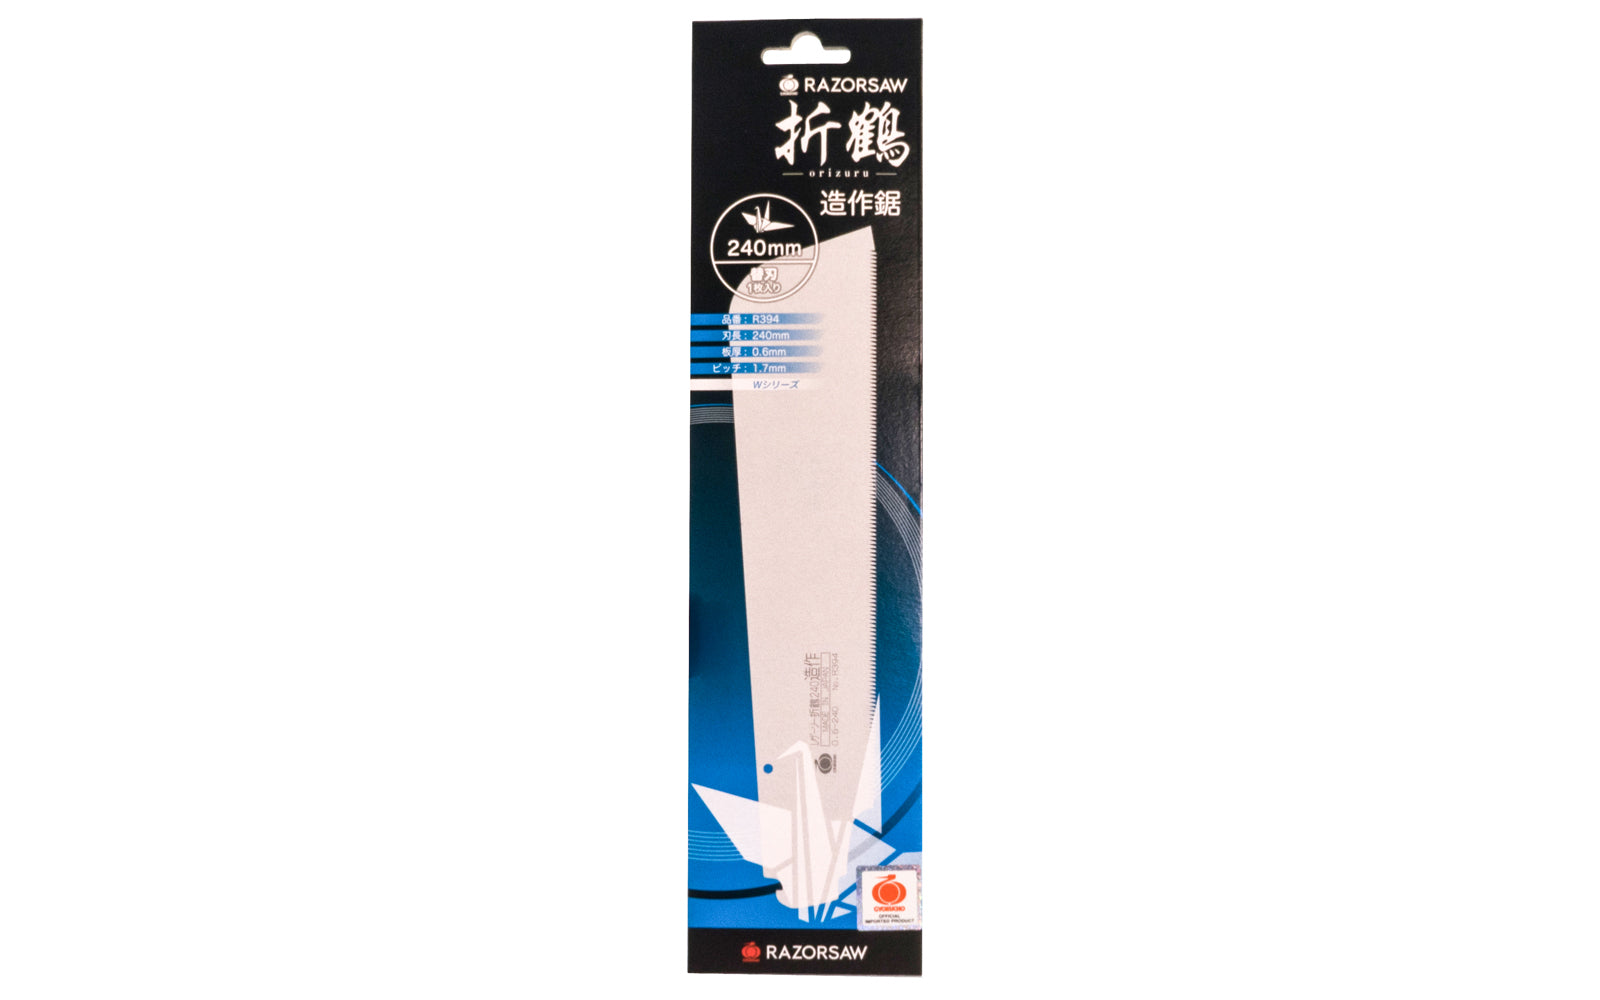 This Replacement Japanese Gyokucho "Orizuru" Blade is a good all-purpose woodworking blade for general timber & lumber, Ply wood, Laminated wood, & Particle board (OSB), MDF panel. The teeth are impulse hardened. Folding Saw Blade. Blade Thickness:  0.6 mm. Folding Saw Blade. Crosscut Teeth:  15 TPI. Made in Japan.